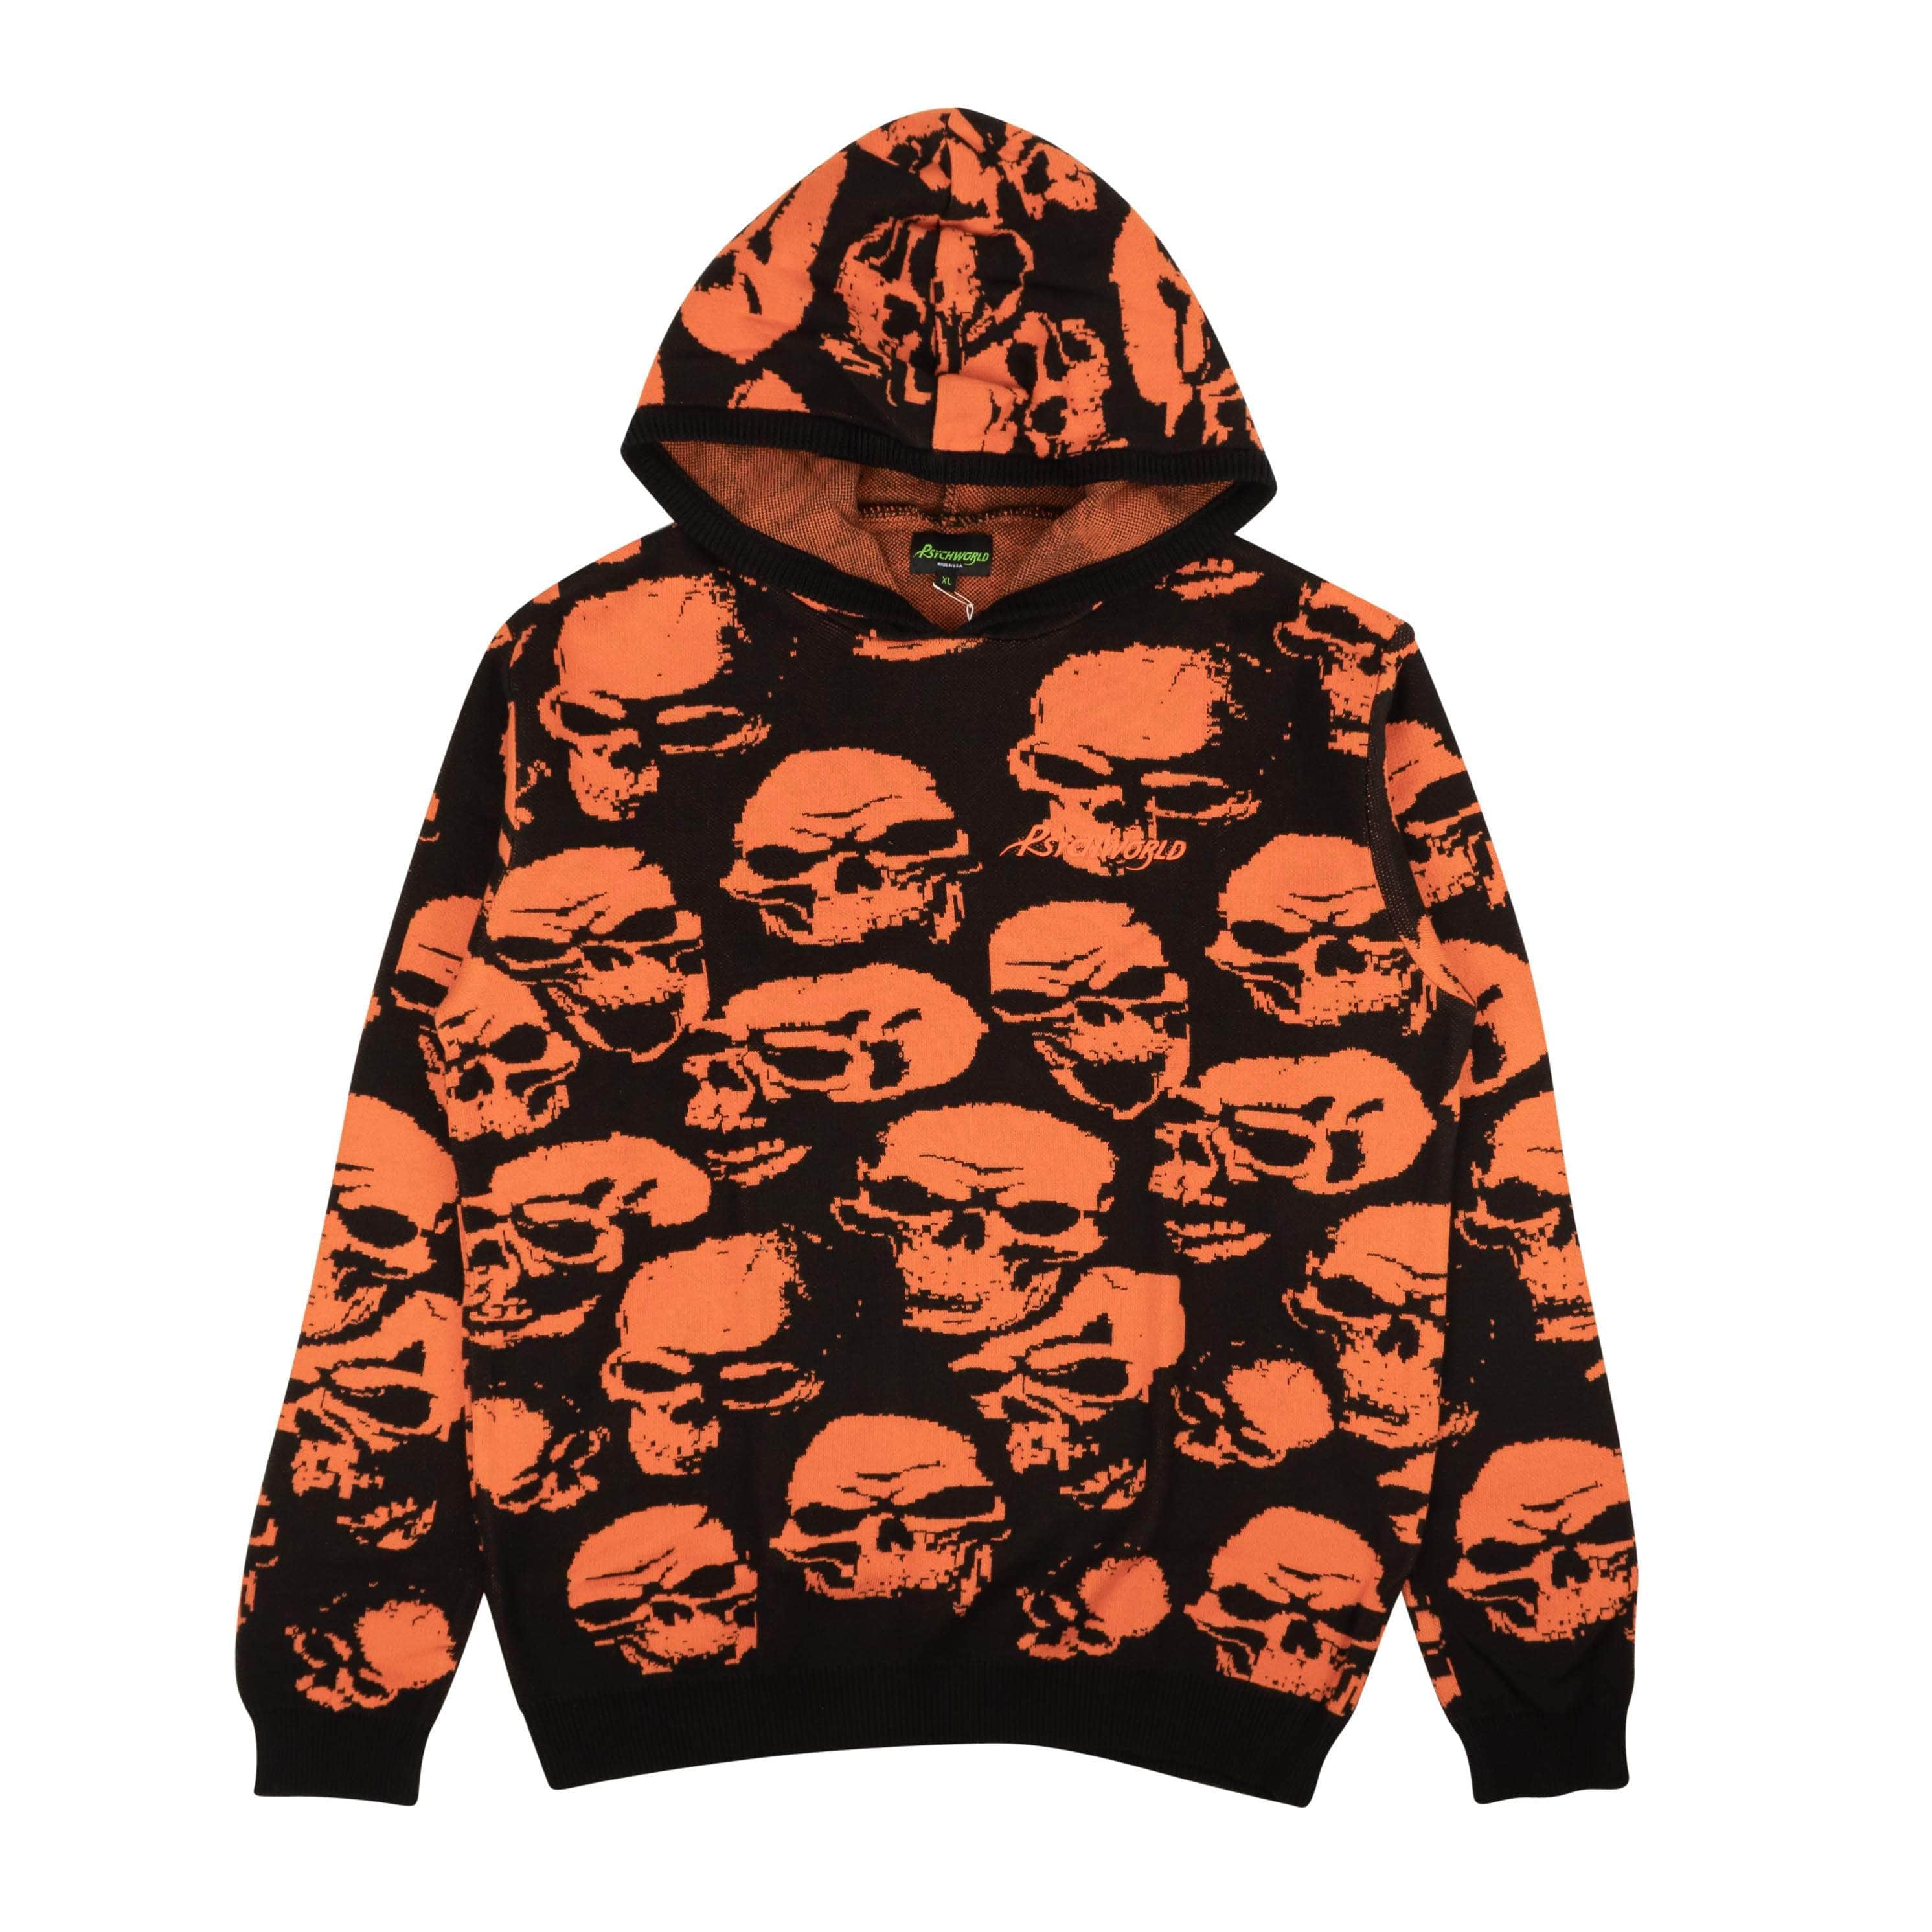 Psychworld channelenable-all, chicmi, couponcollection, gender-mens, main-clothing, mens-pullover-sweaters, mens-shoes, MixedApparel, psychworld, SPO, under-250 95-PSY-1066/S Knit_SKull_Hoodie_Orange Orange PSYCHWORLD Knit Skull Hoodie